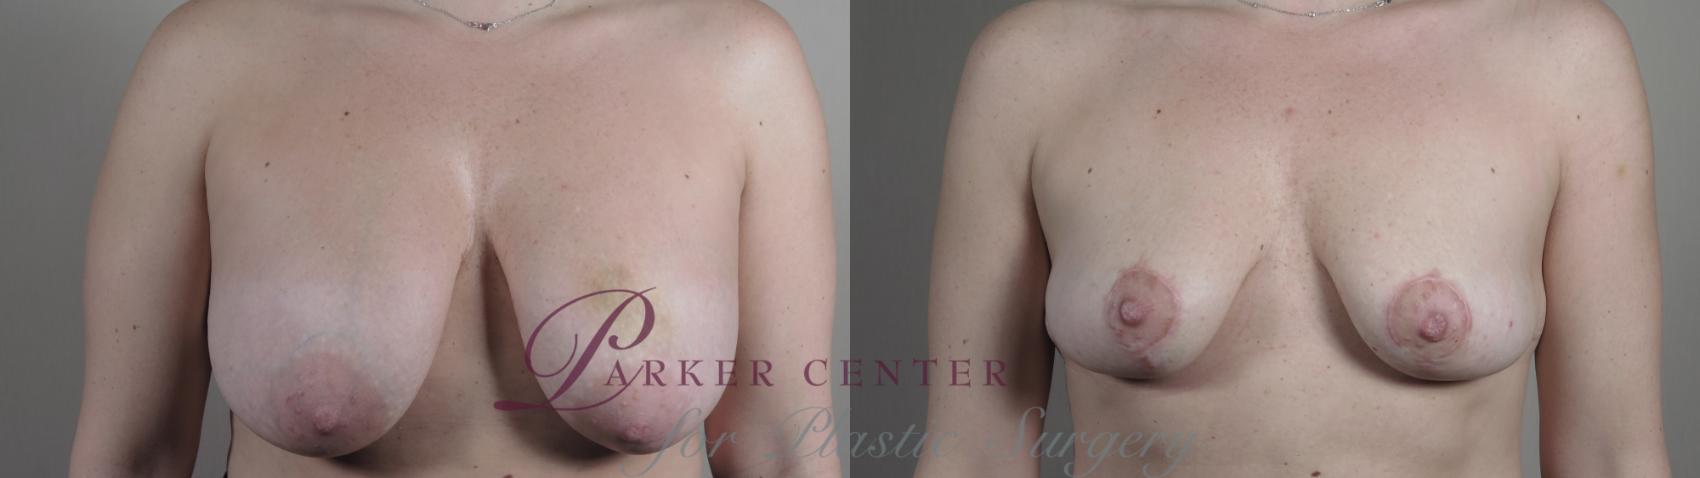 Breast Implant Removal Case 983 Before & After Front | Paramus, NJ | Parker Center for Plastic Surgery